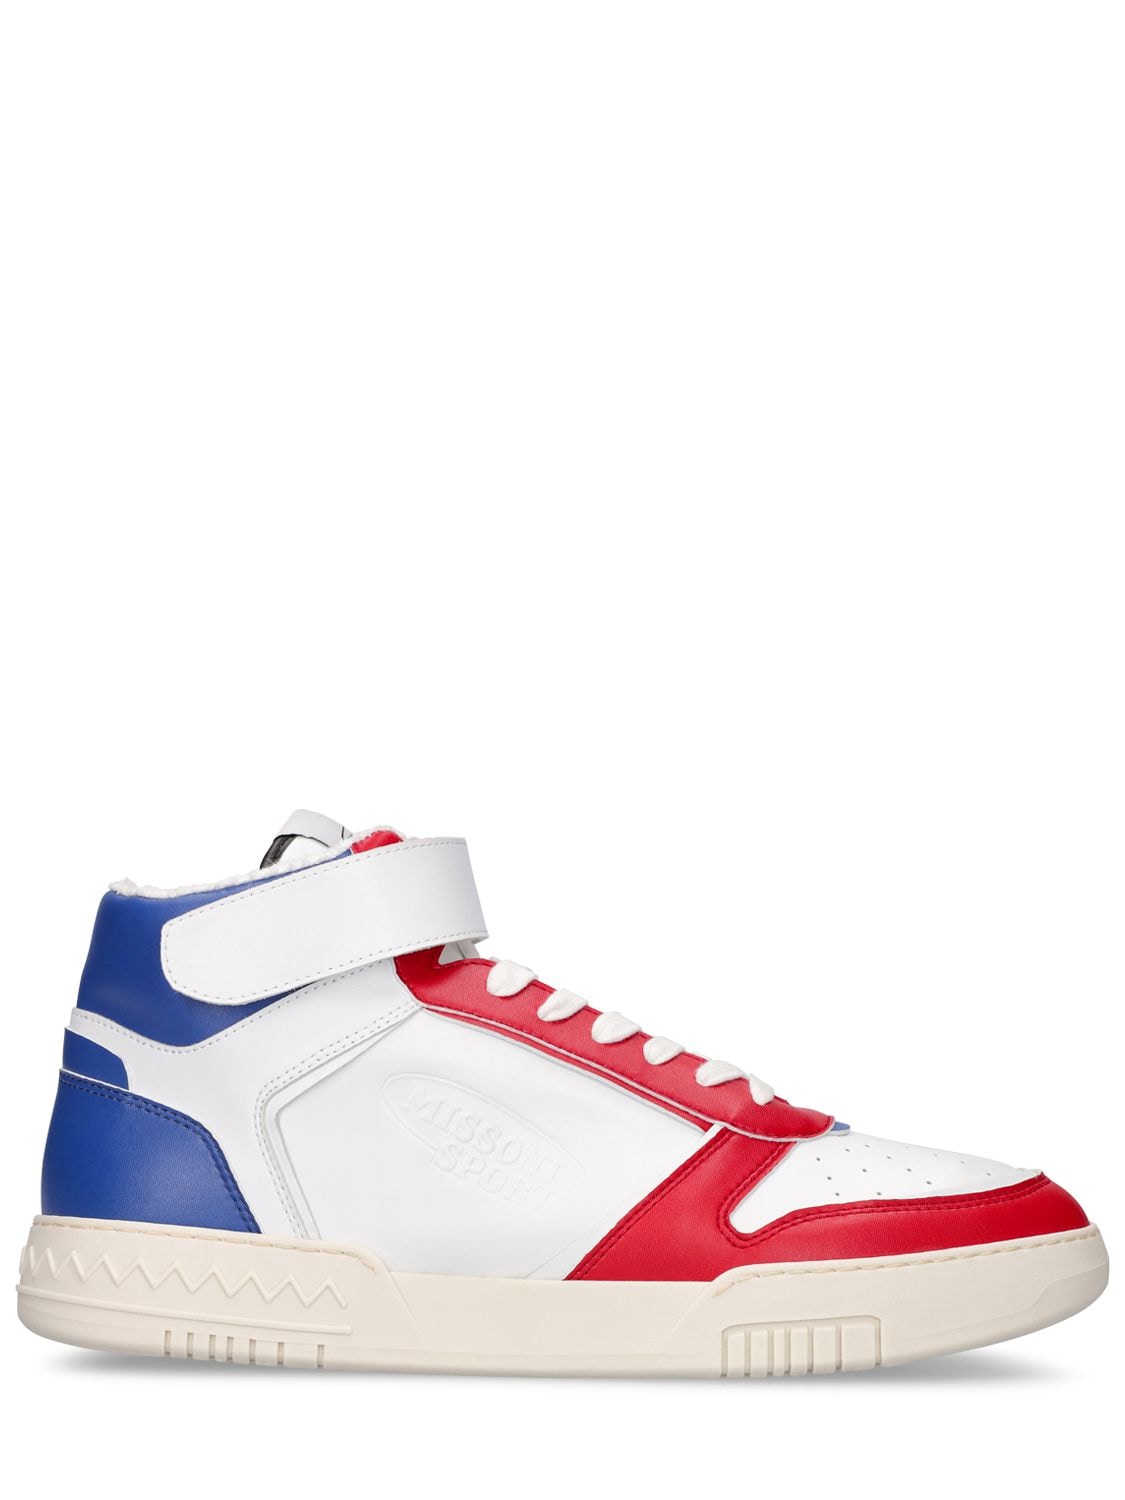 Missoni Basket New High Trainers In Red,white,blue